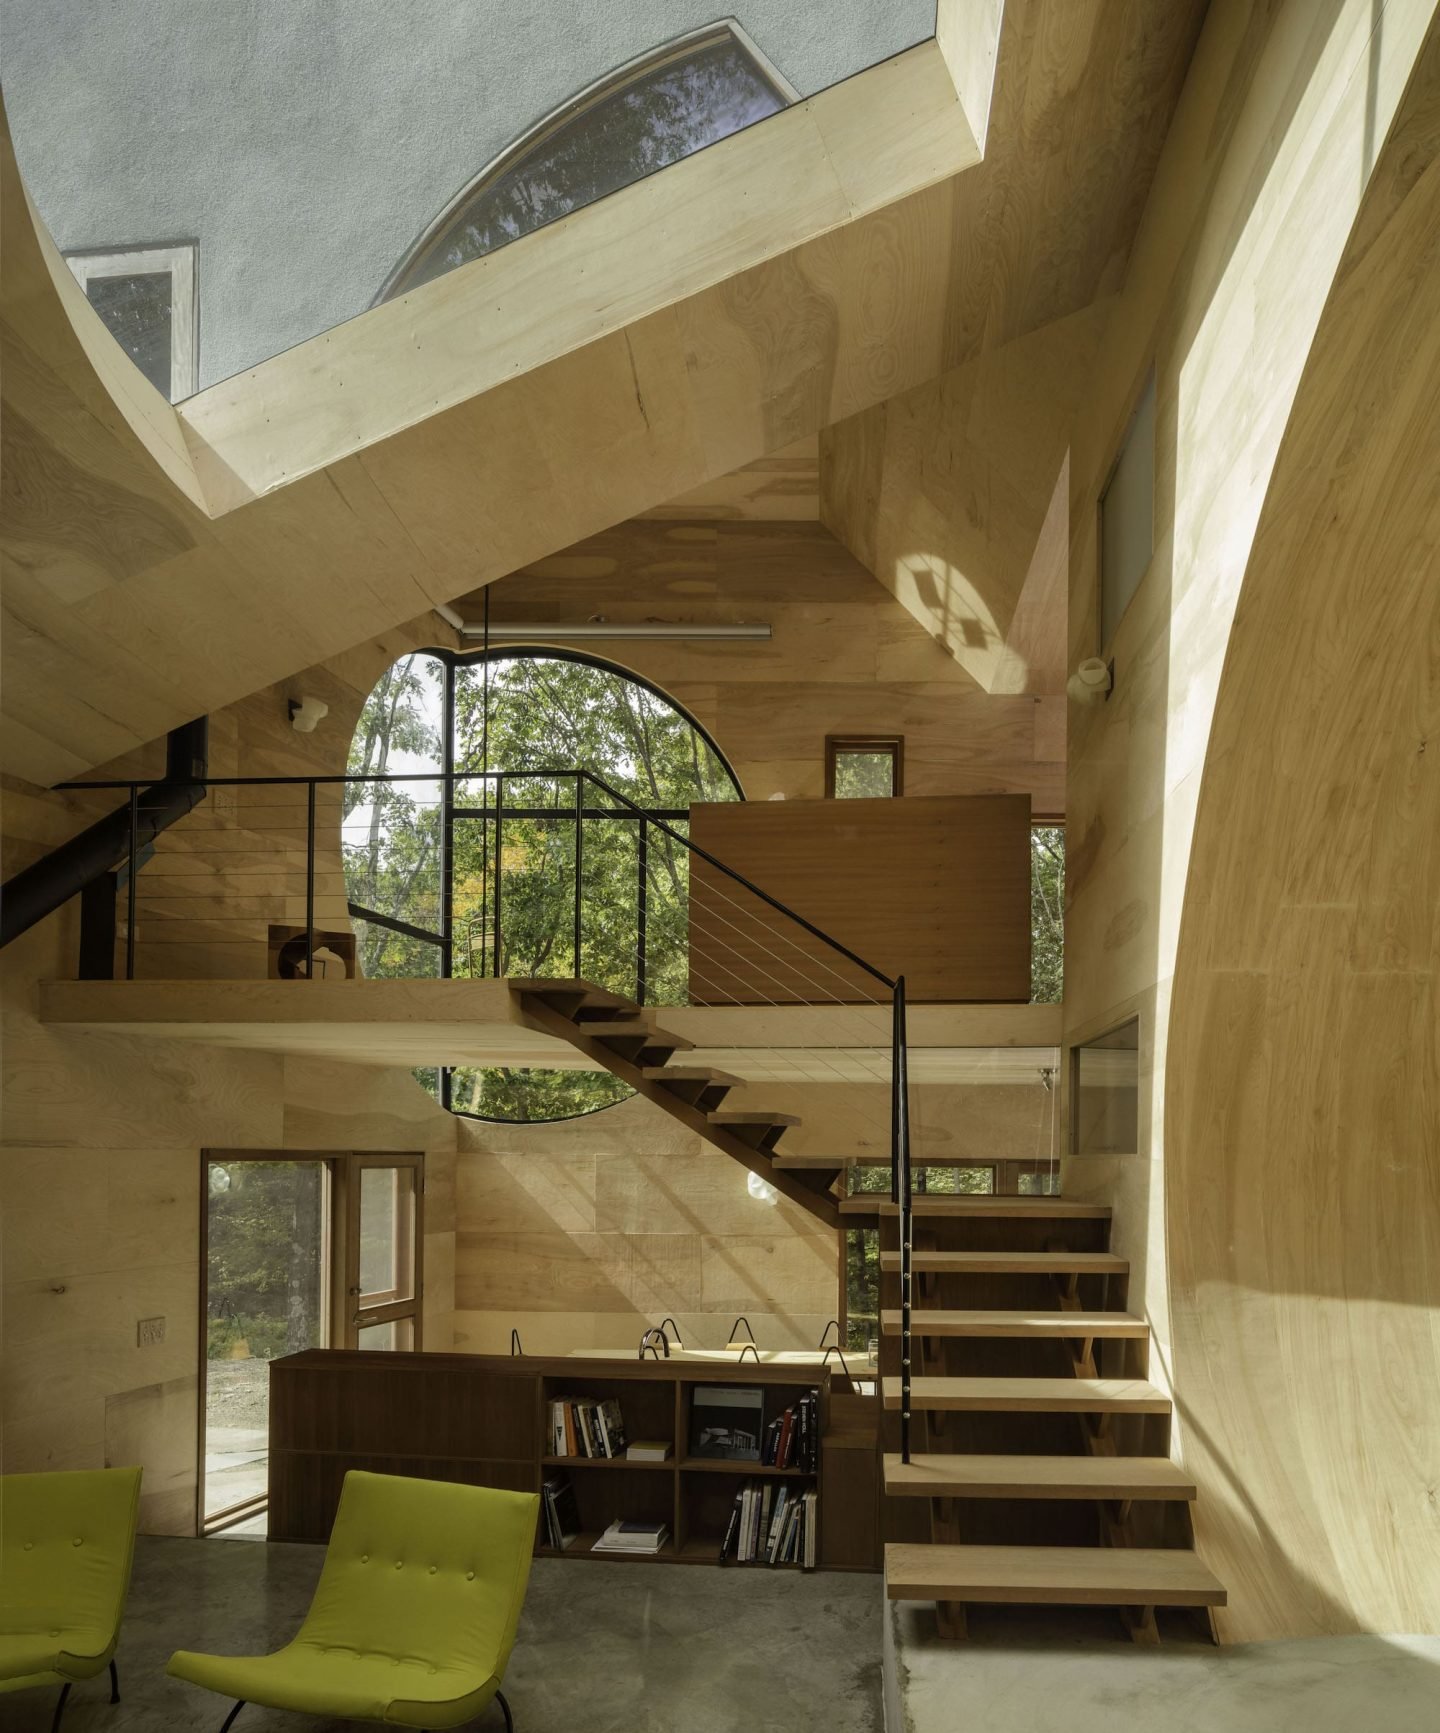 IGNANT-Architecture-Ex-of-In-House-Steven-Holl-Paul-Warchol-04